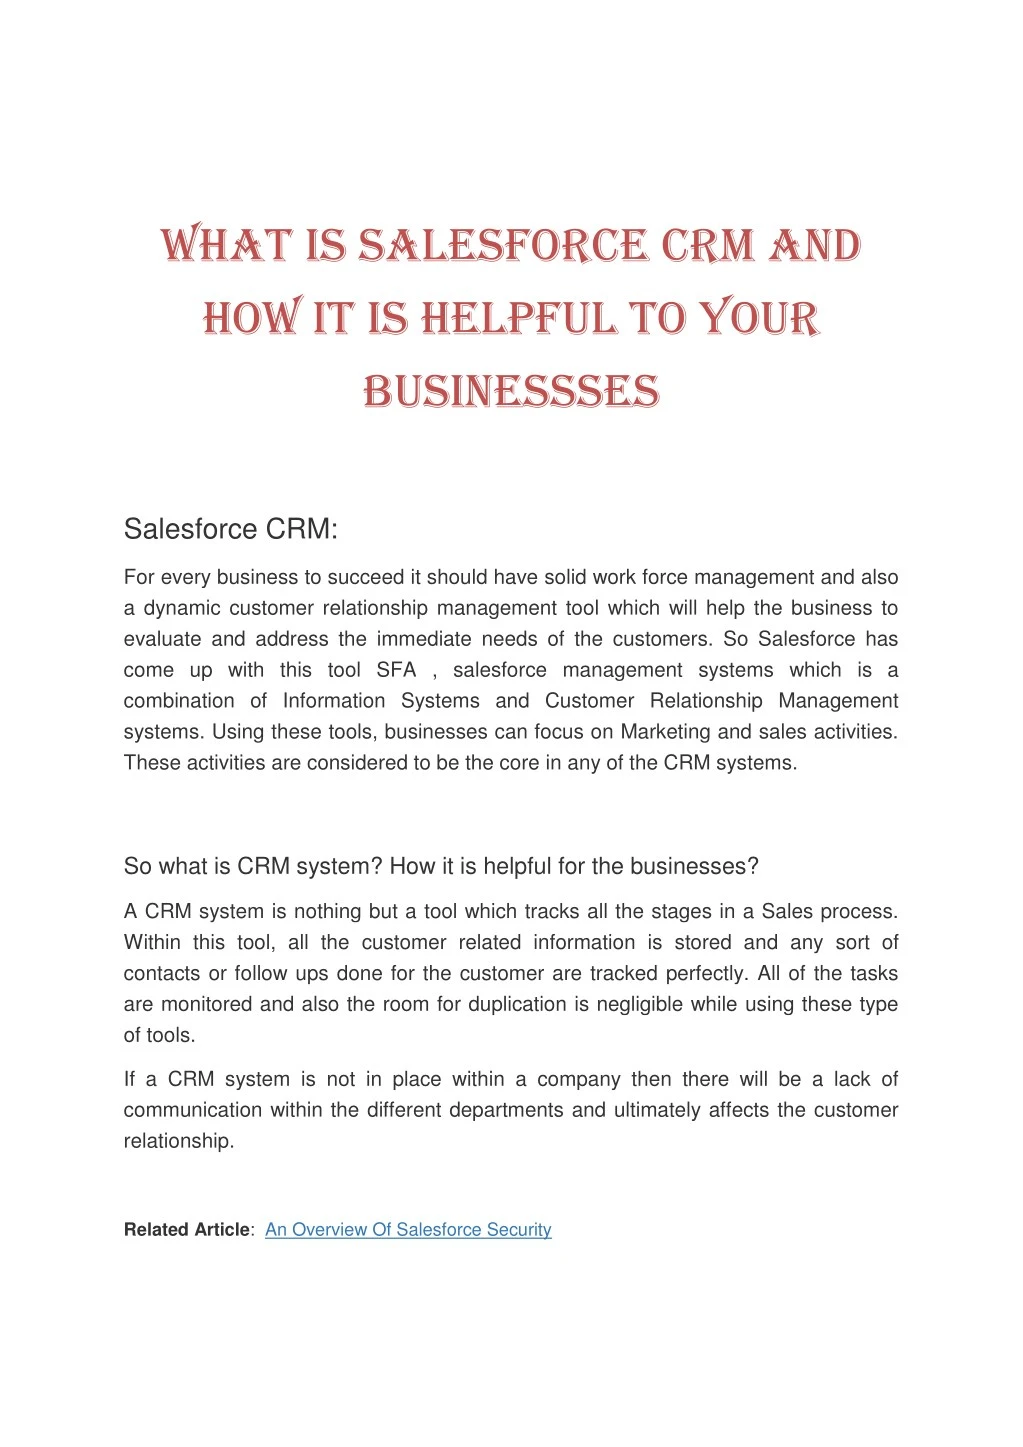 what is salesforce crm and how it is helpful